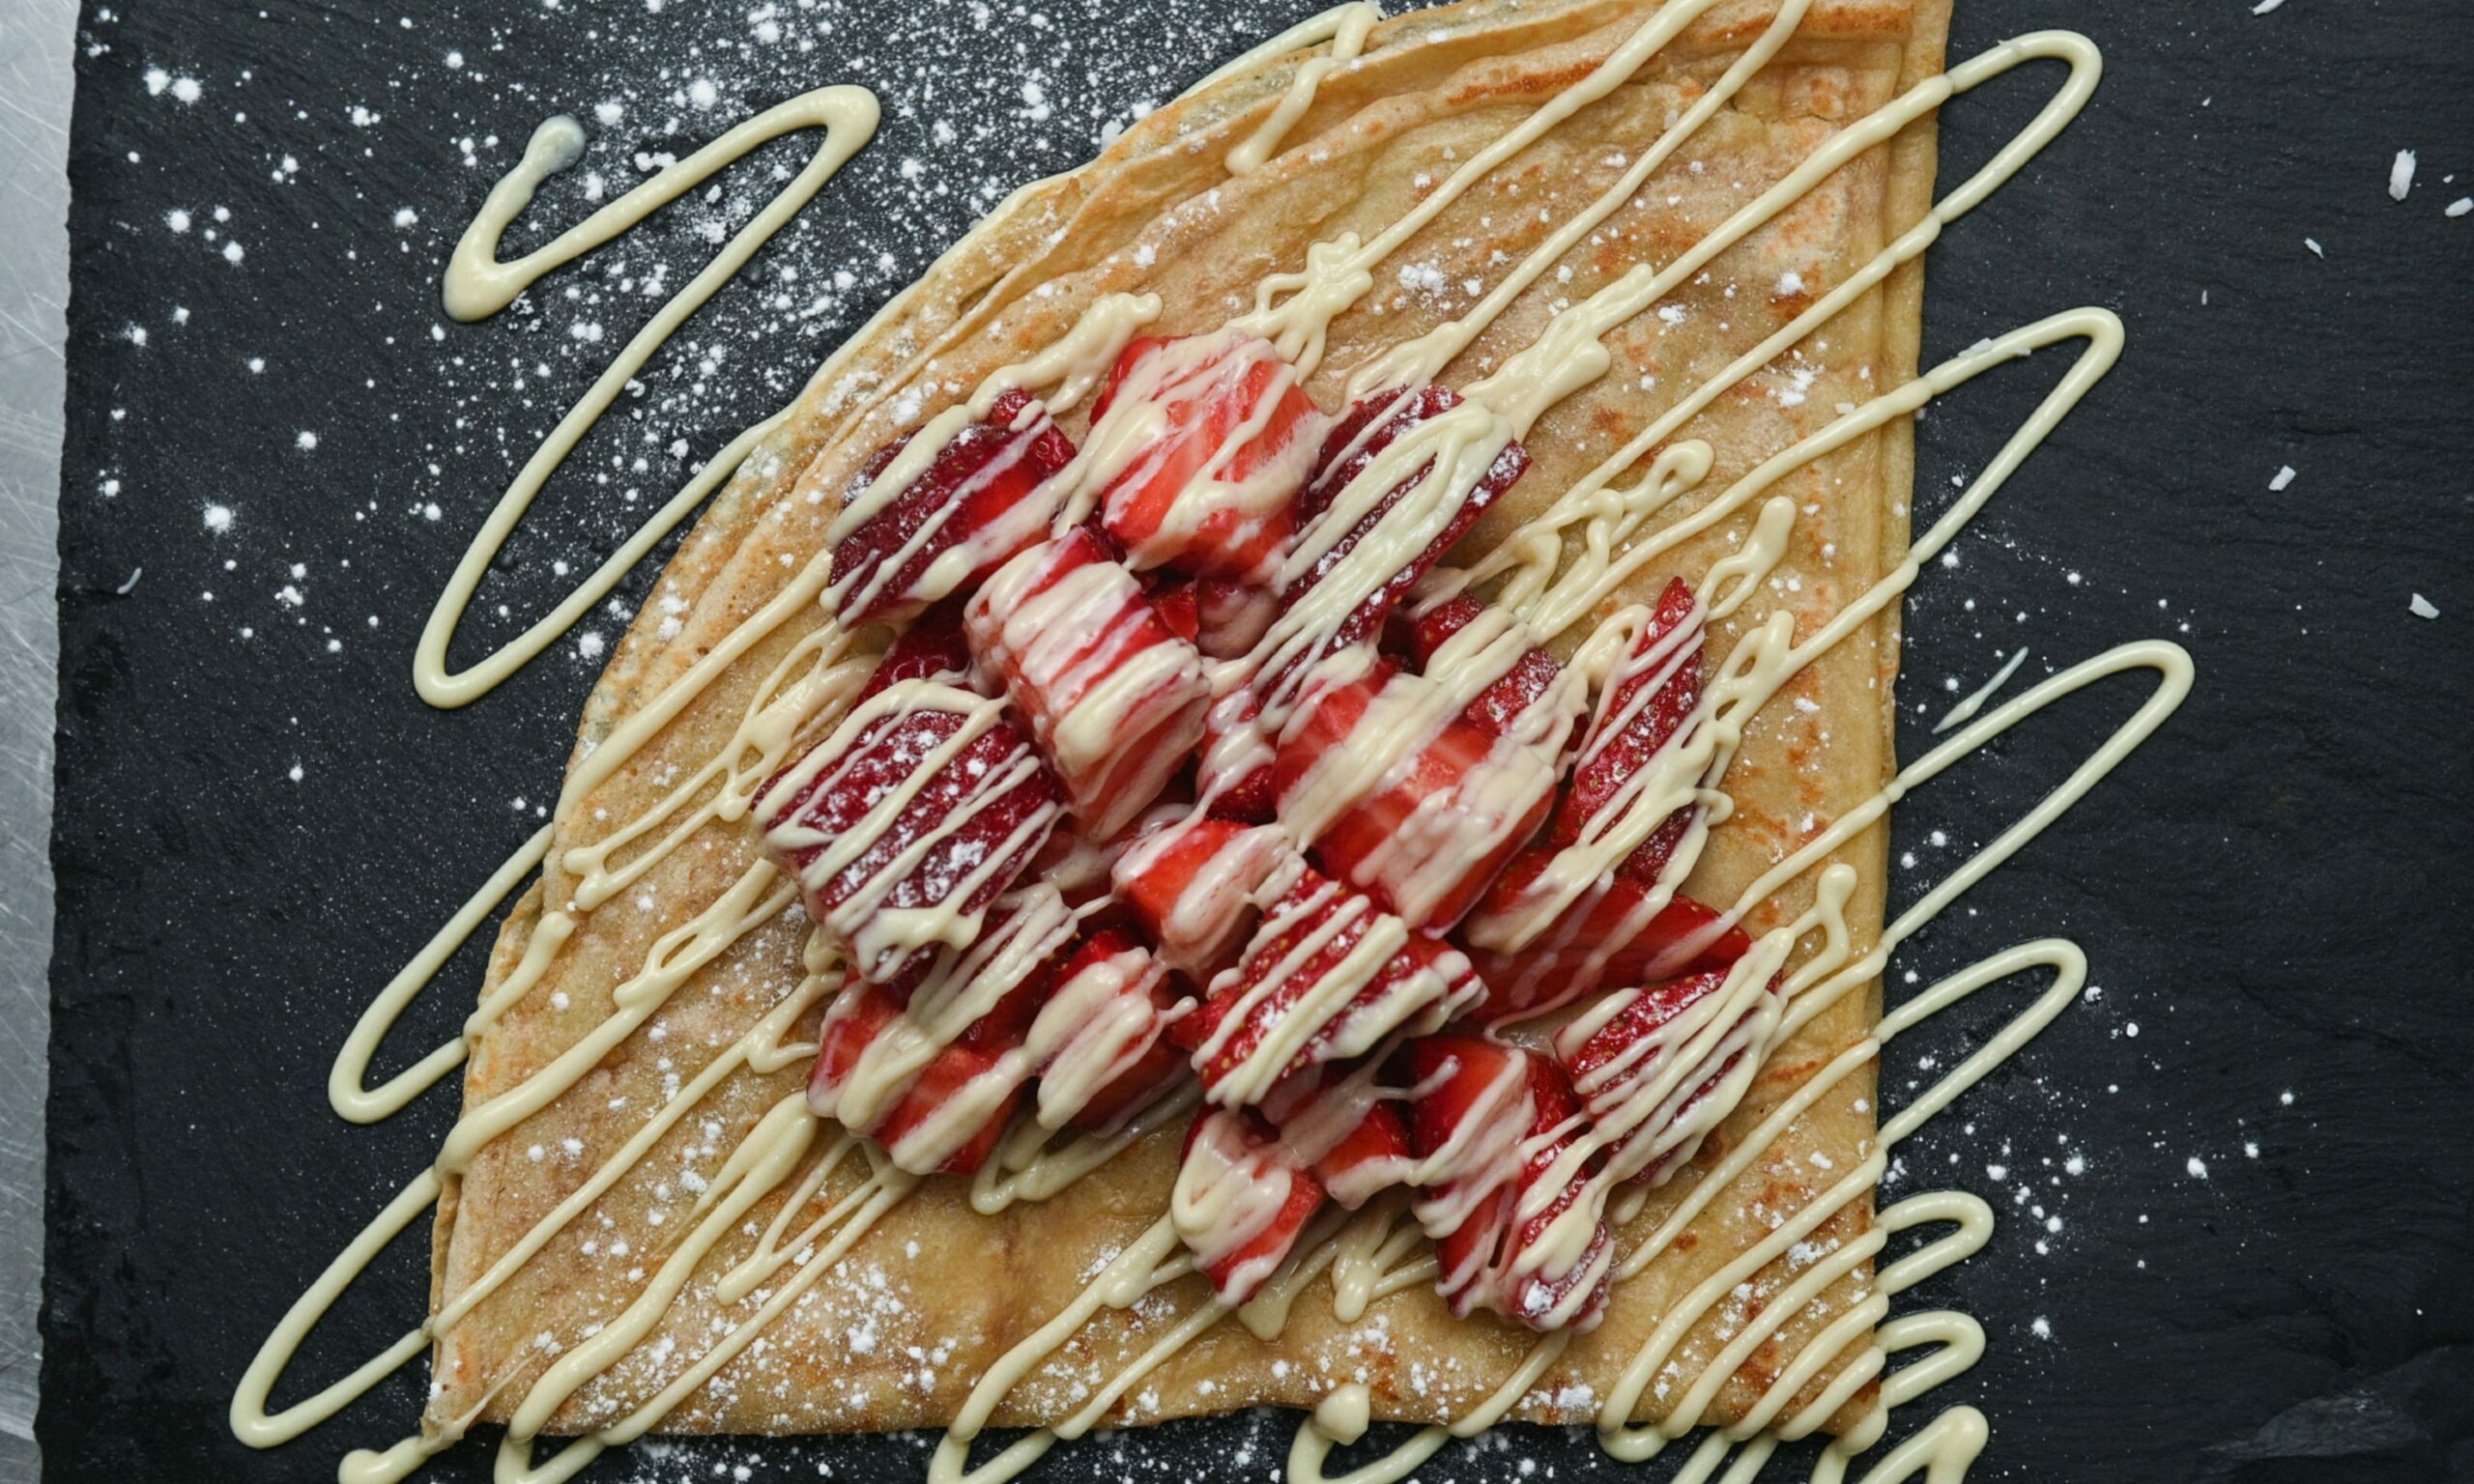 A crepe from one of the new Aberdeen beach food trucks